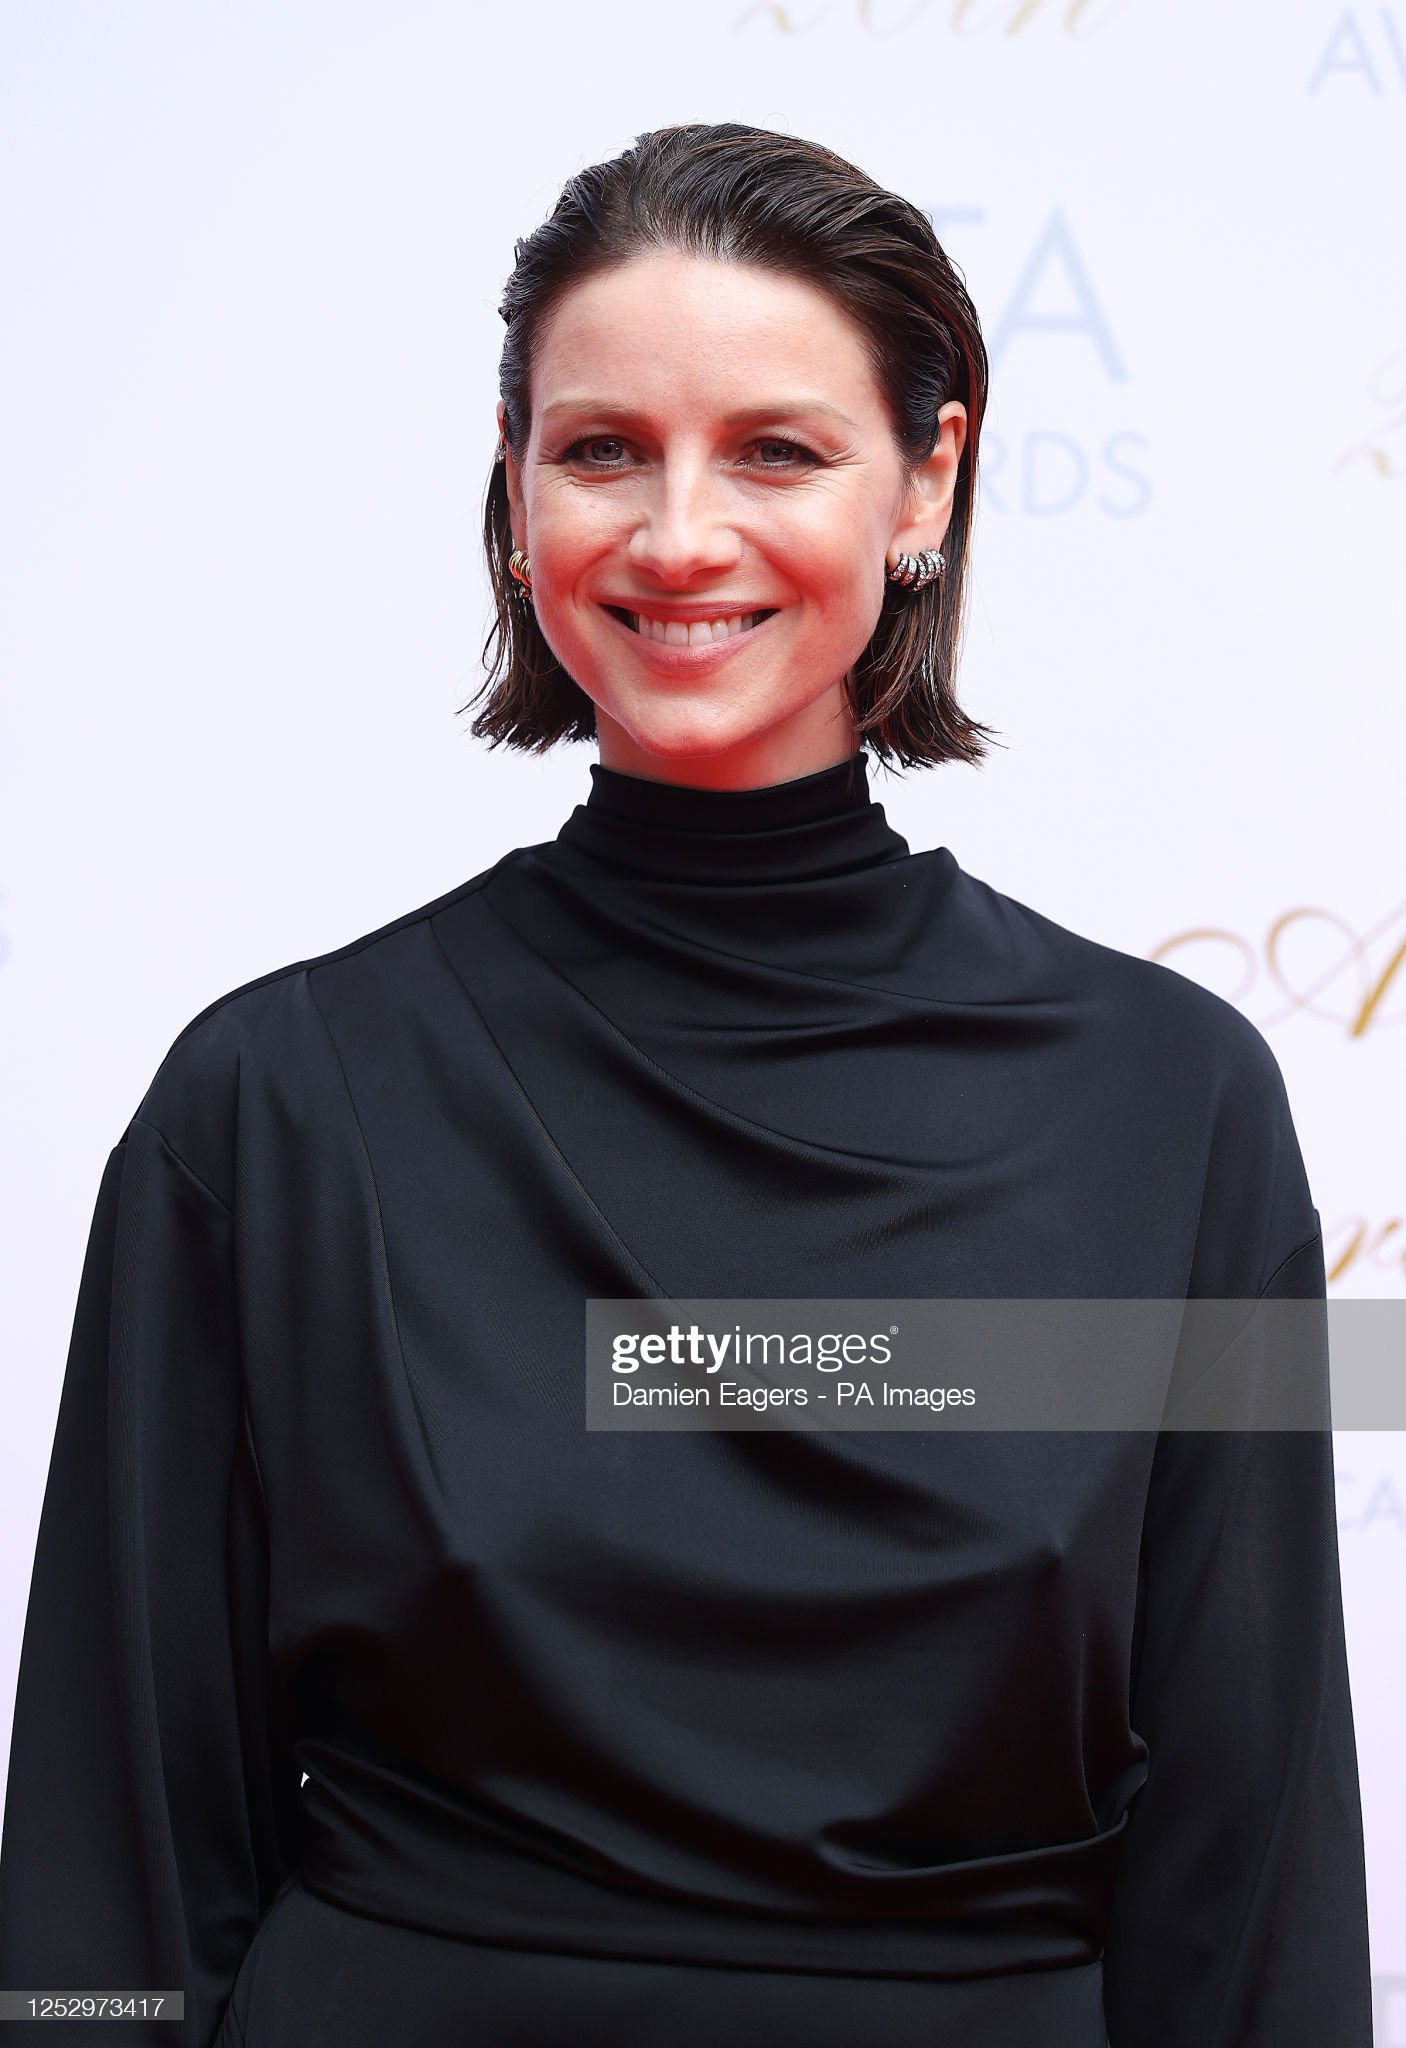 gettyimages-1252973417-2048x2048.jpg